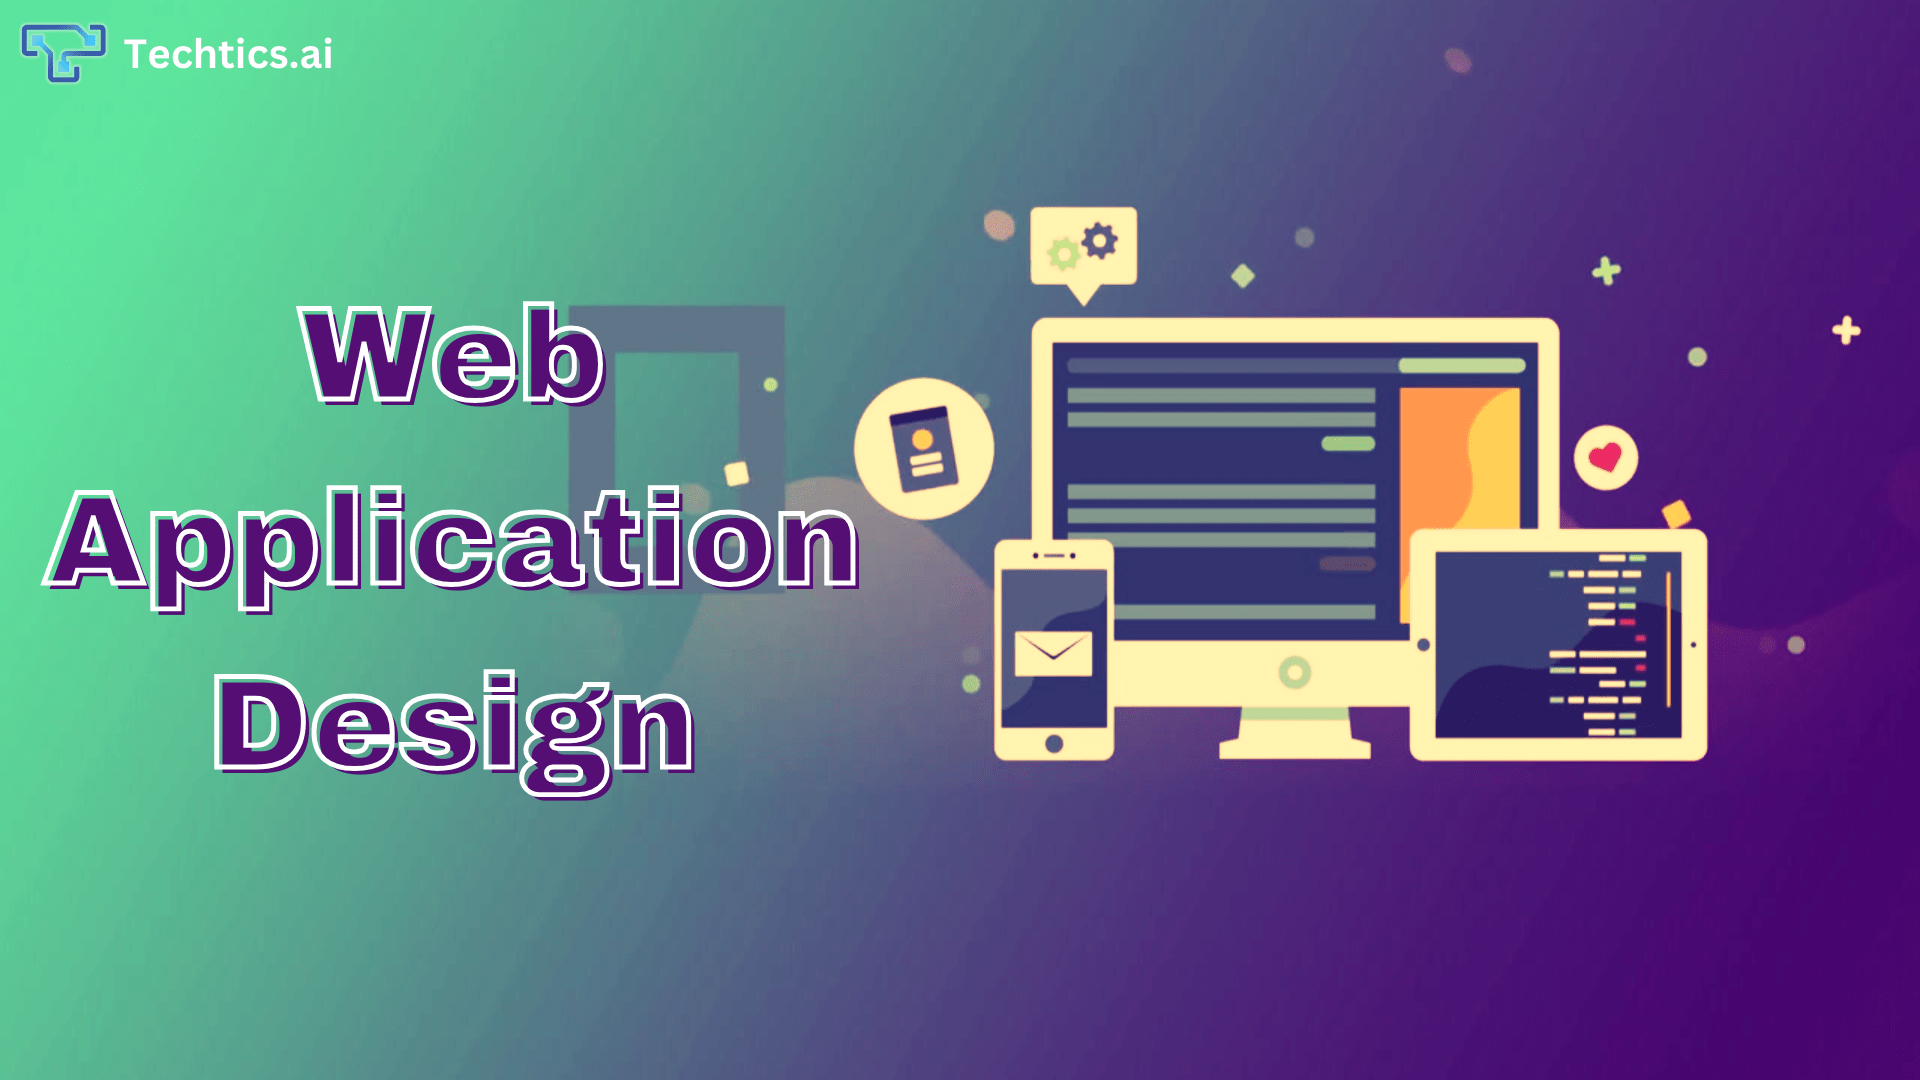 How to Plan Web Application Design